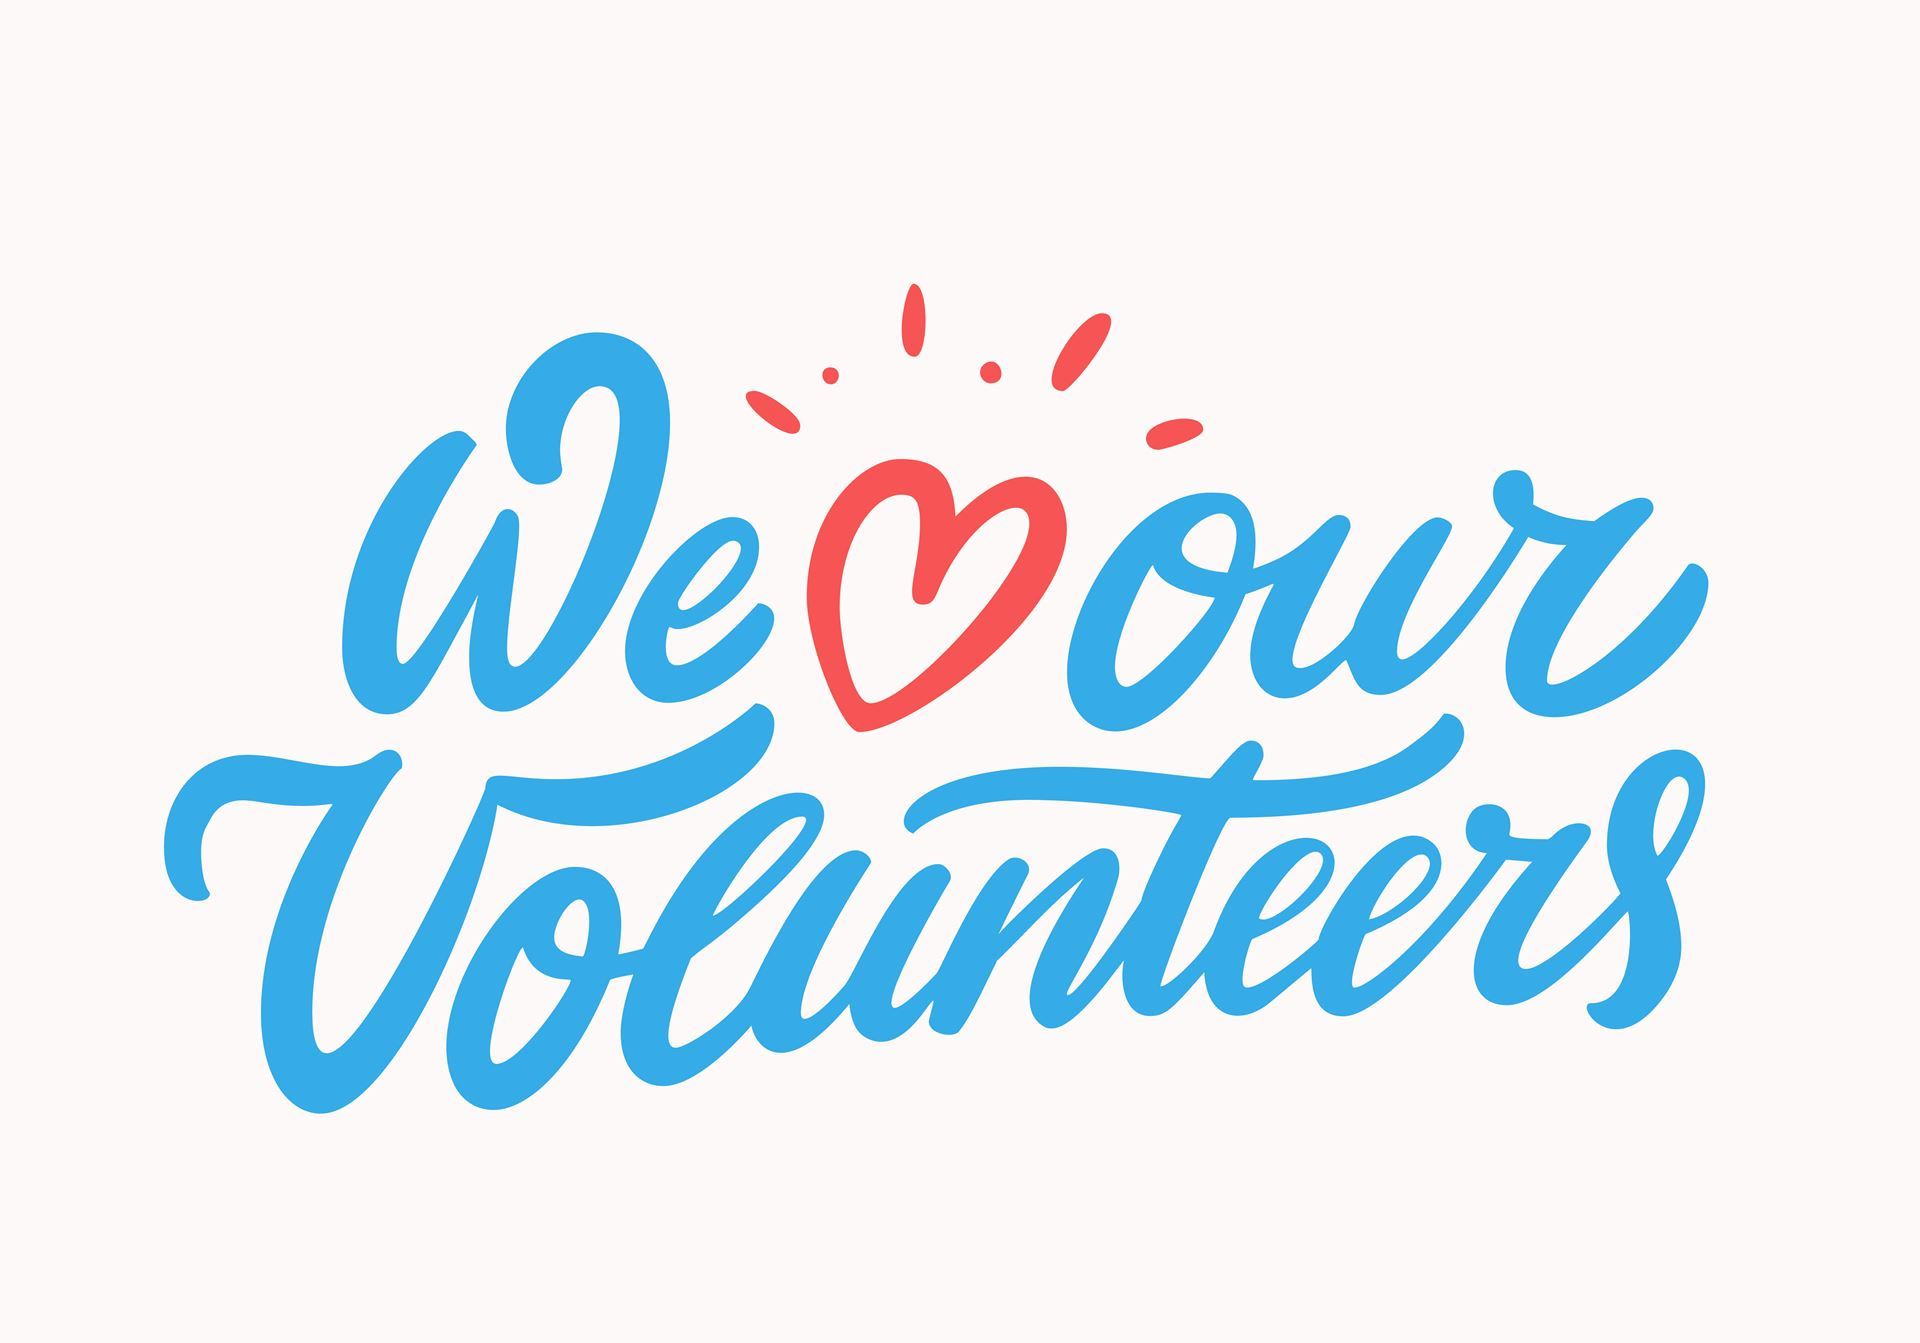 Image: We heart our volunteers. Blue writing with a read heart. 